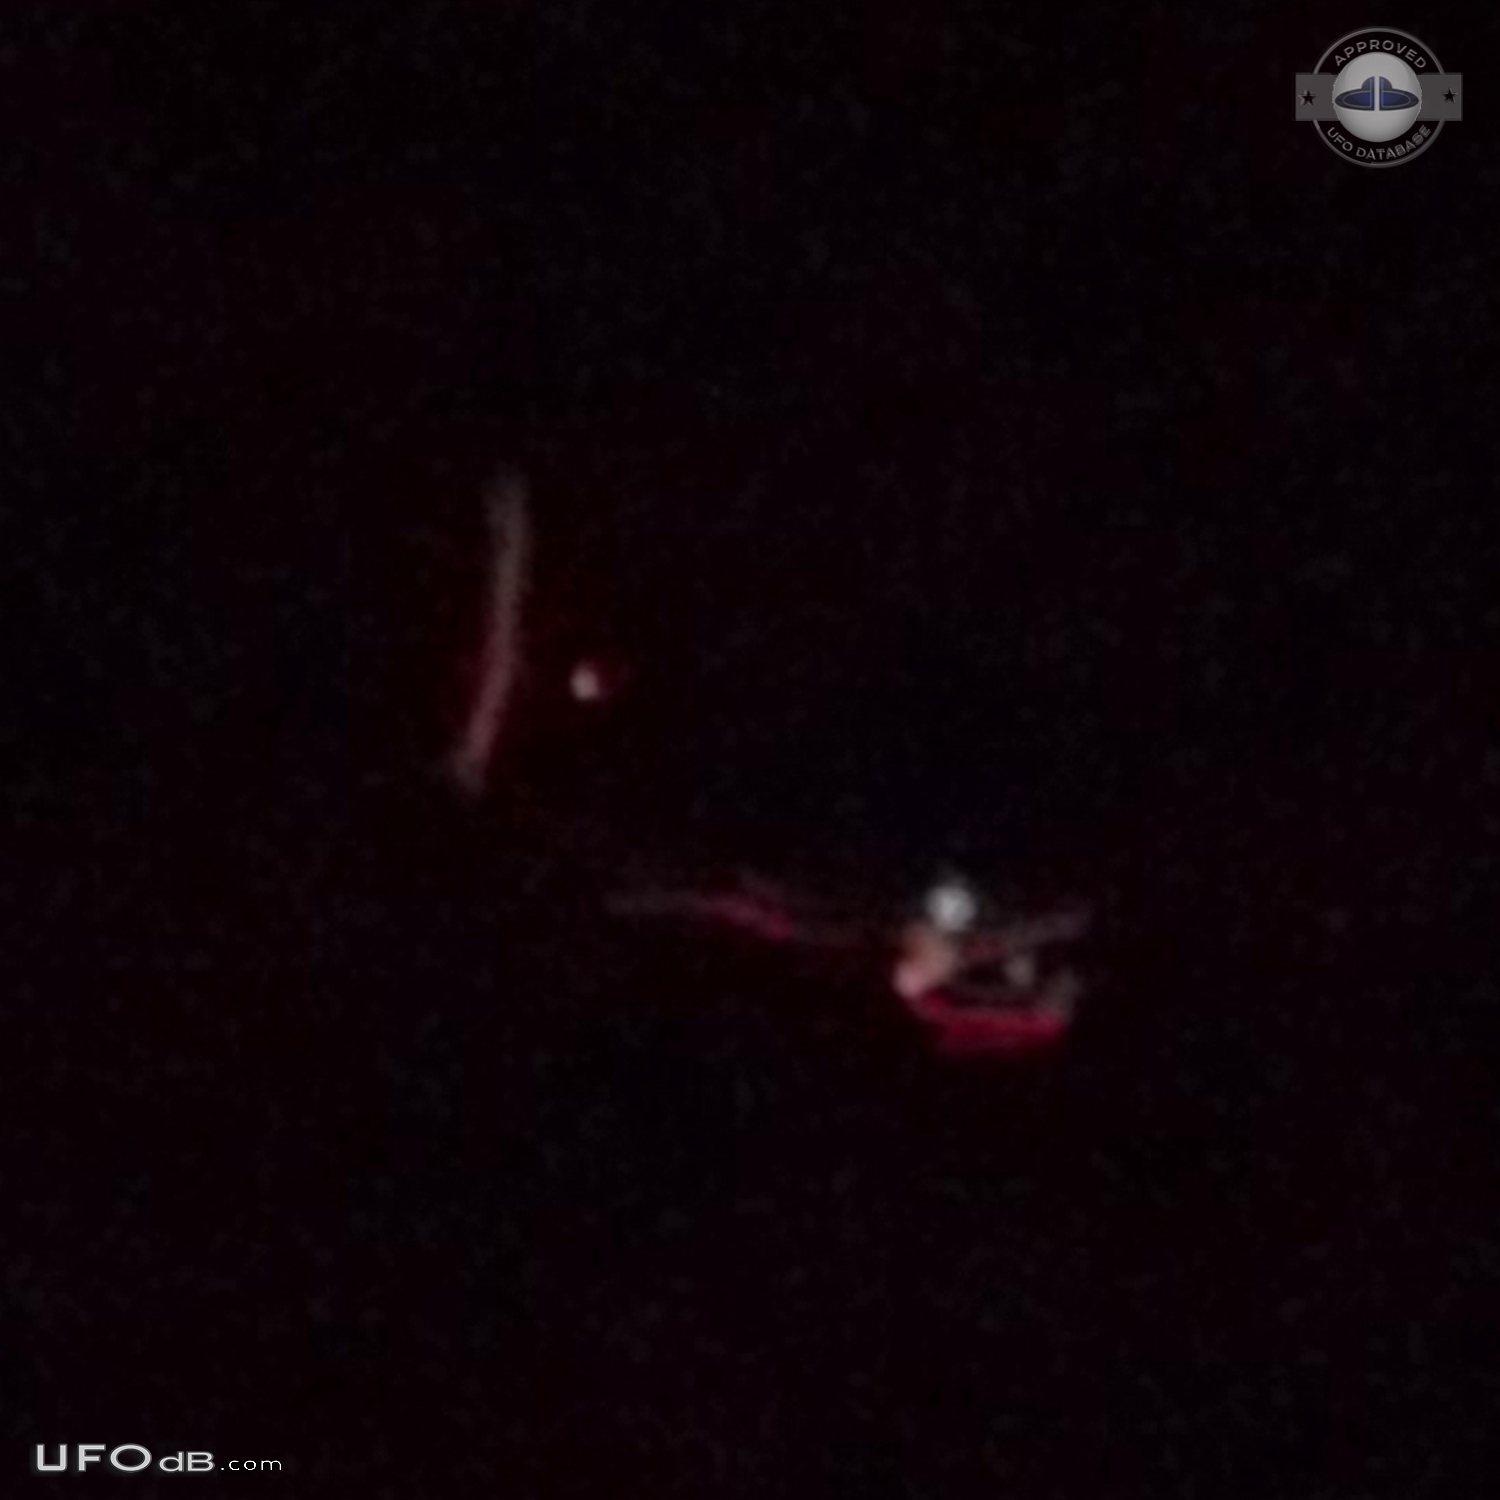 Thought at first it was a star. But too big and bright - Gainesville M UFO Picture #753-2